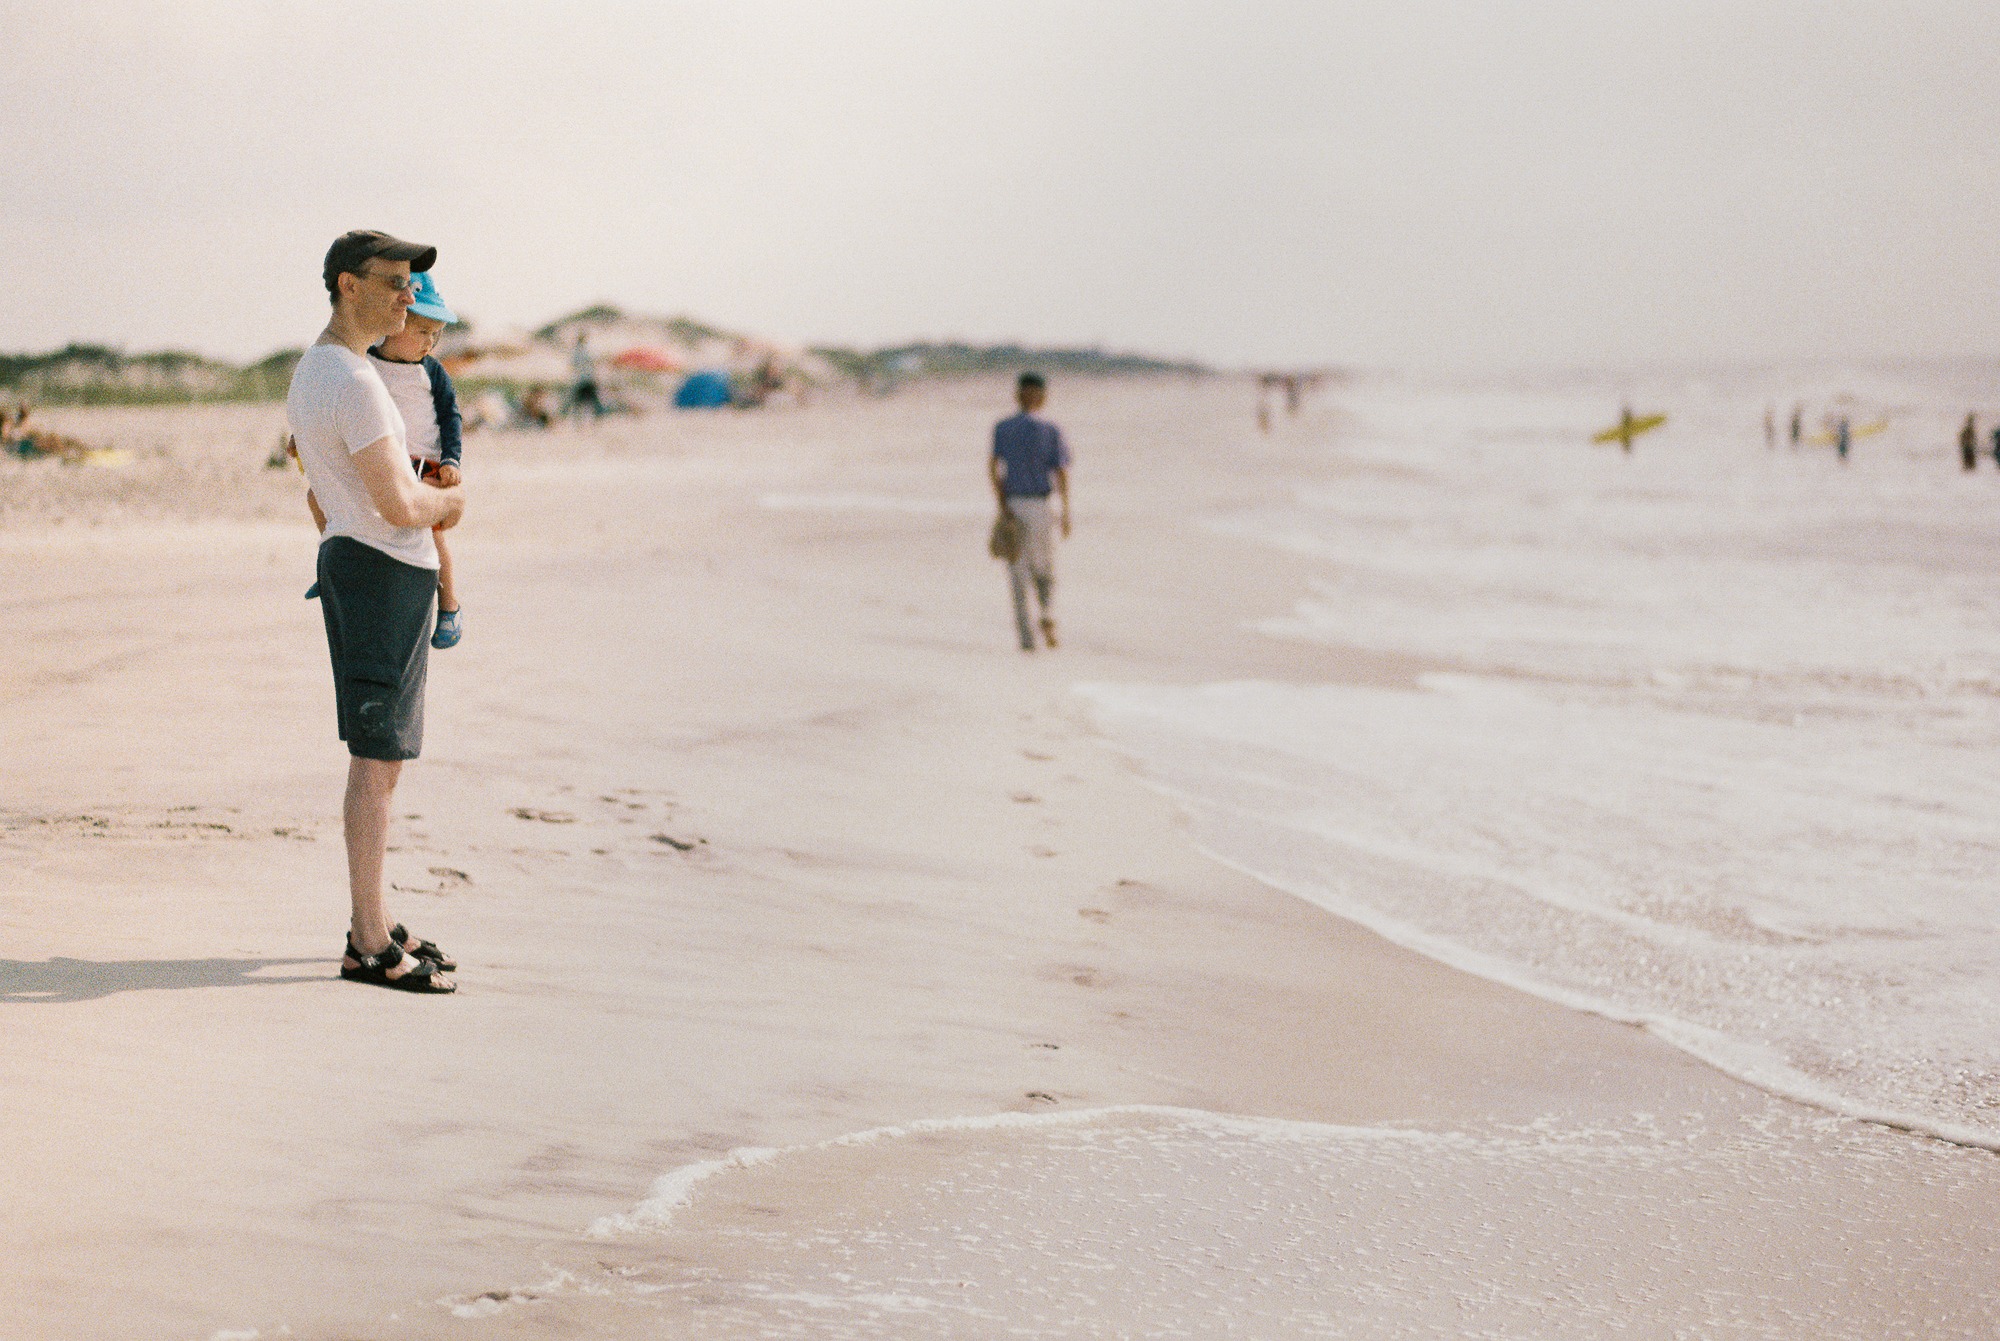 A man and his young son look out towards the ocean in a film photograph taken at Fire Island, NY